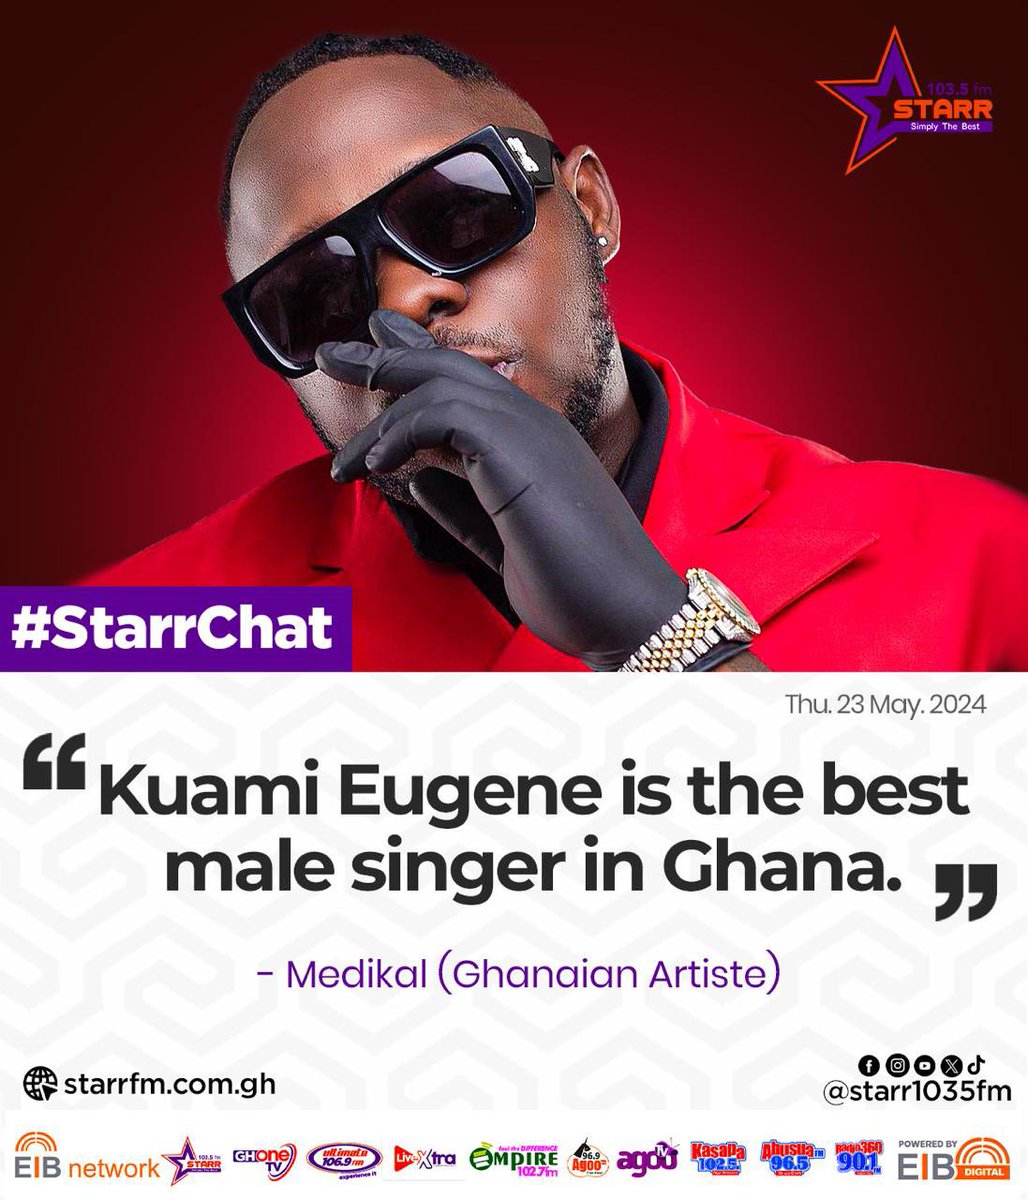 I don’t think this is debatable. Kuami Eugene is him.